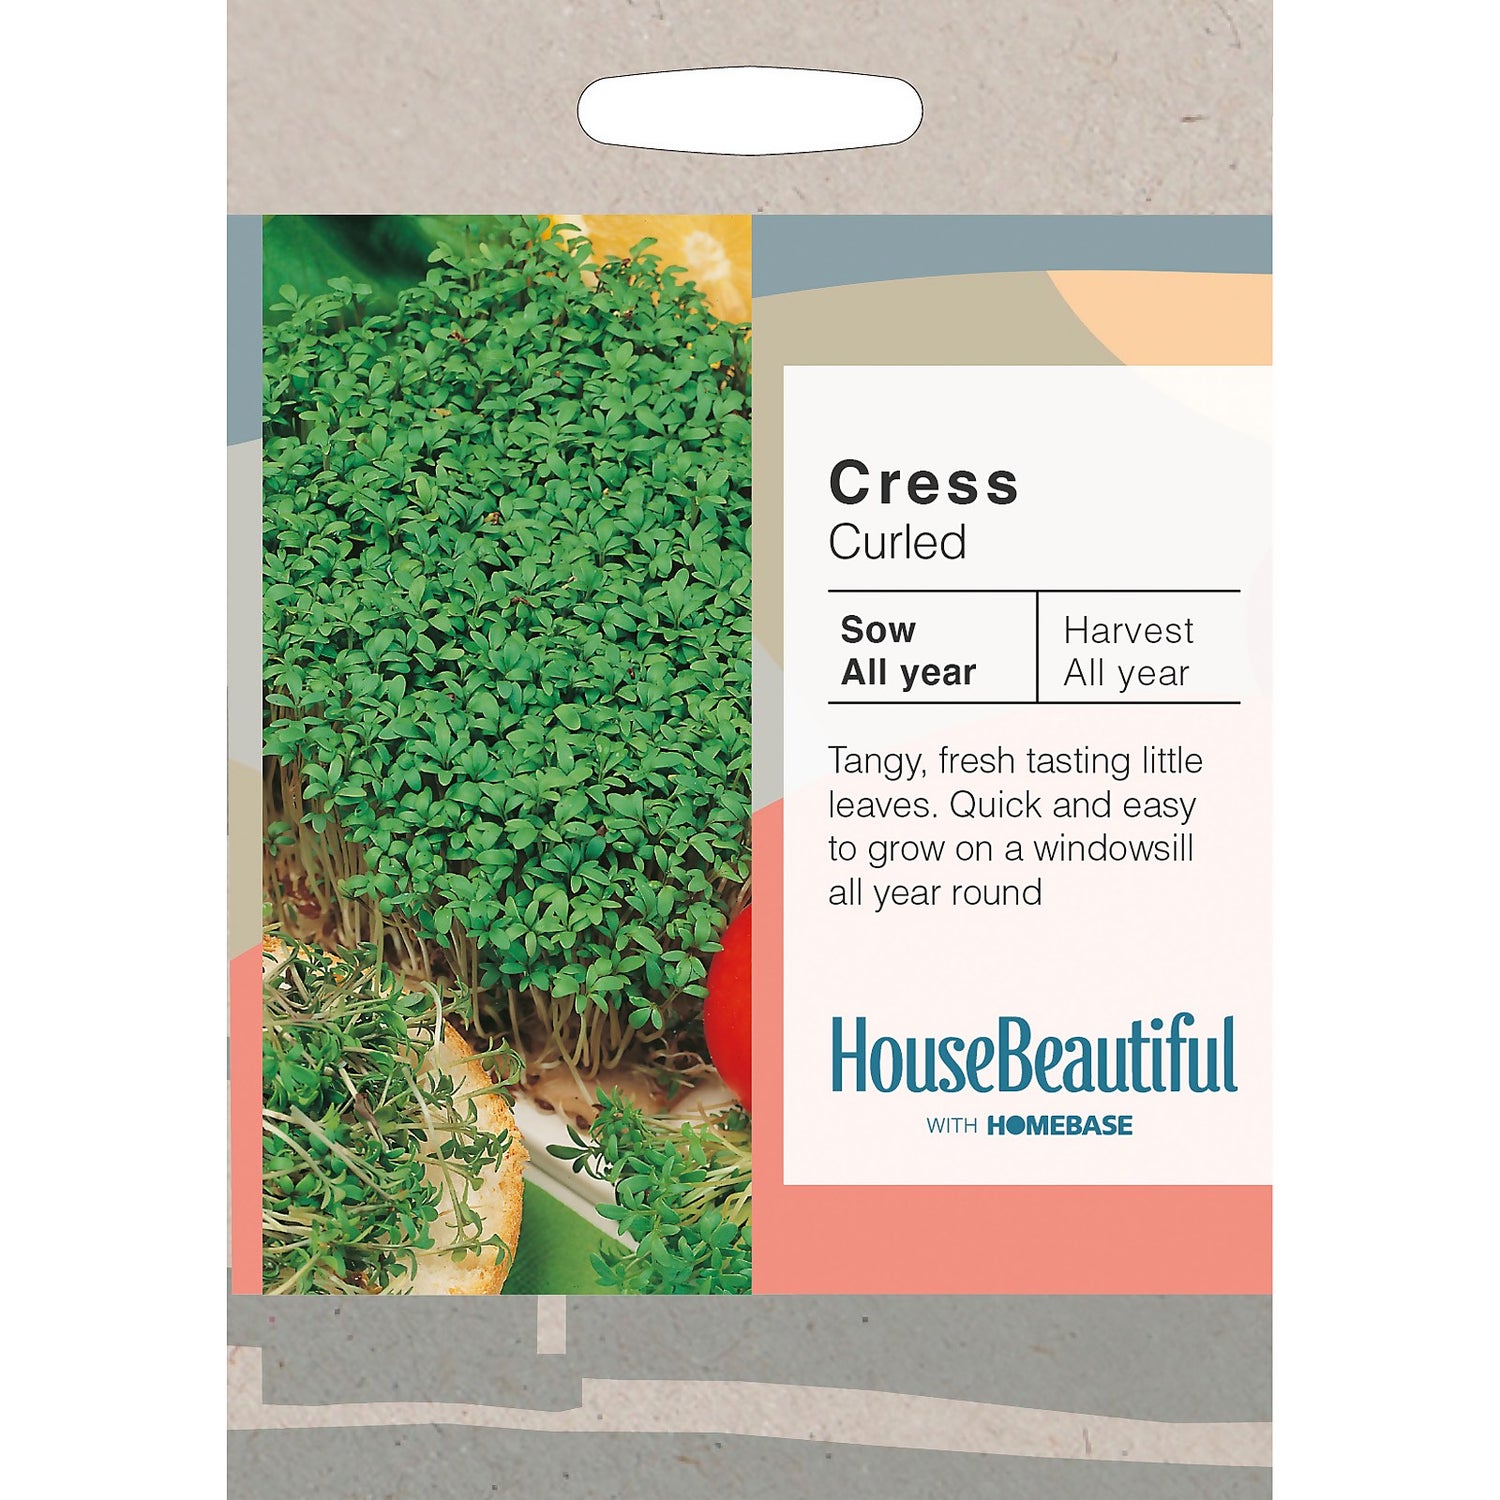 Curled, Cress Seed